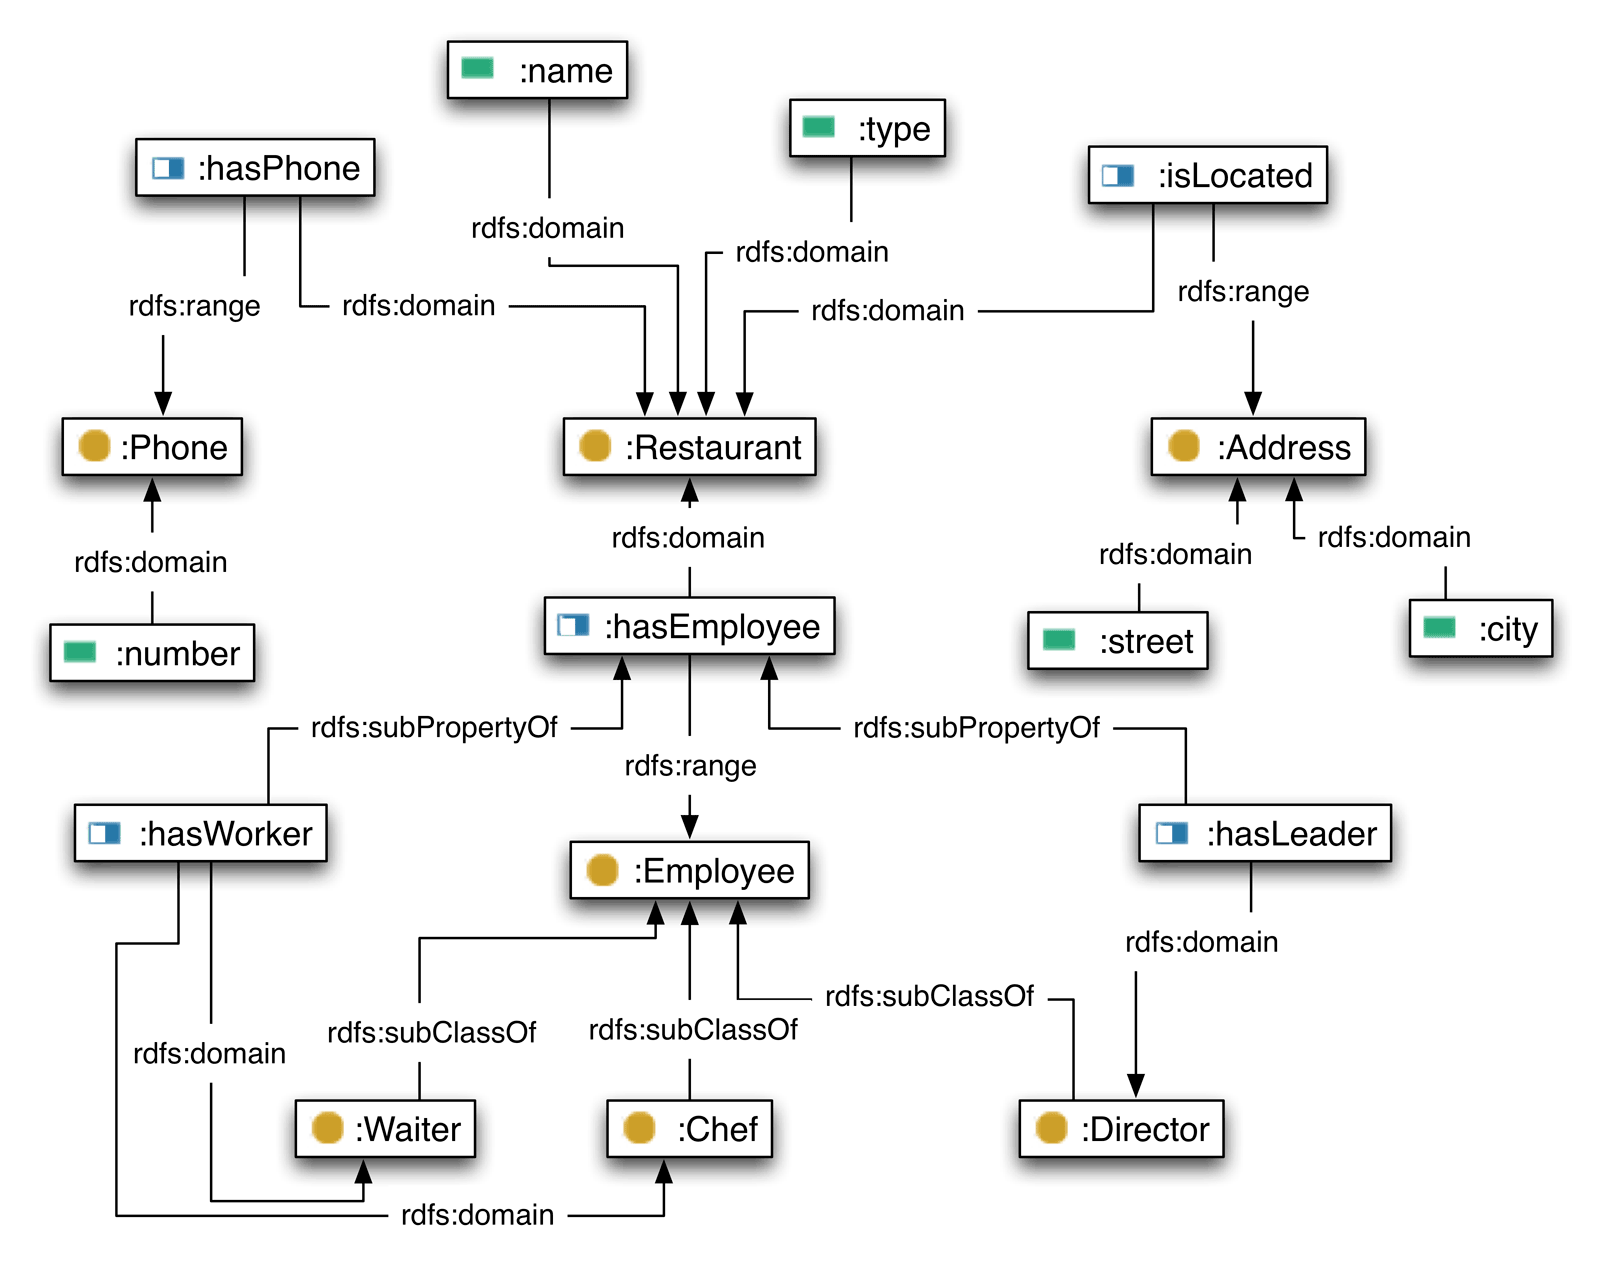 A possible ontology over Restaurants dataset (description in Section 6.1). Classes are represented by circles, related data by half-white rectangles and attributes by full-colour rectangles. Key concepts of the ontology are Restaurant, Address, Phone and Employee.